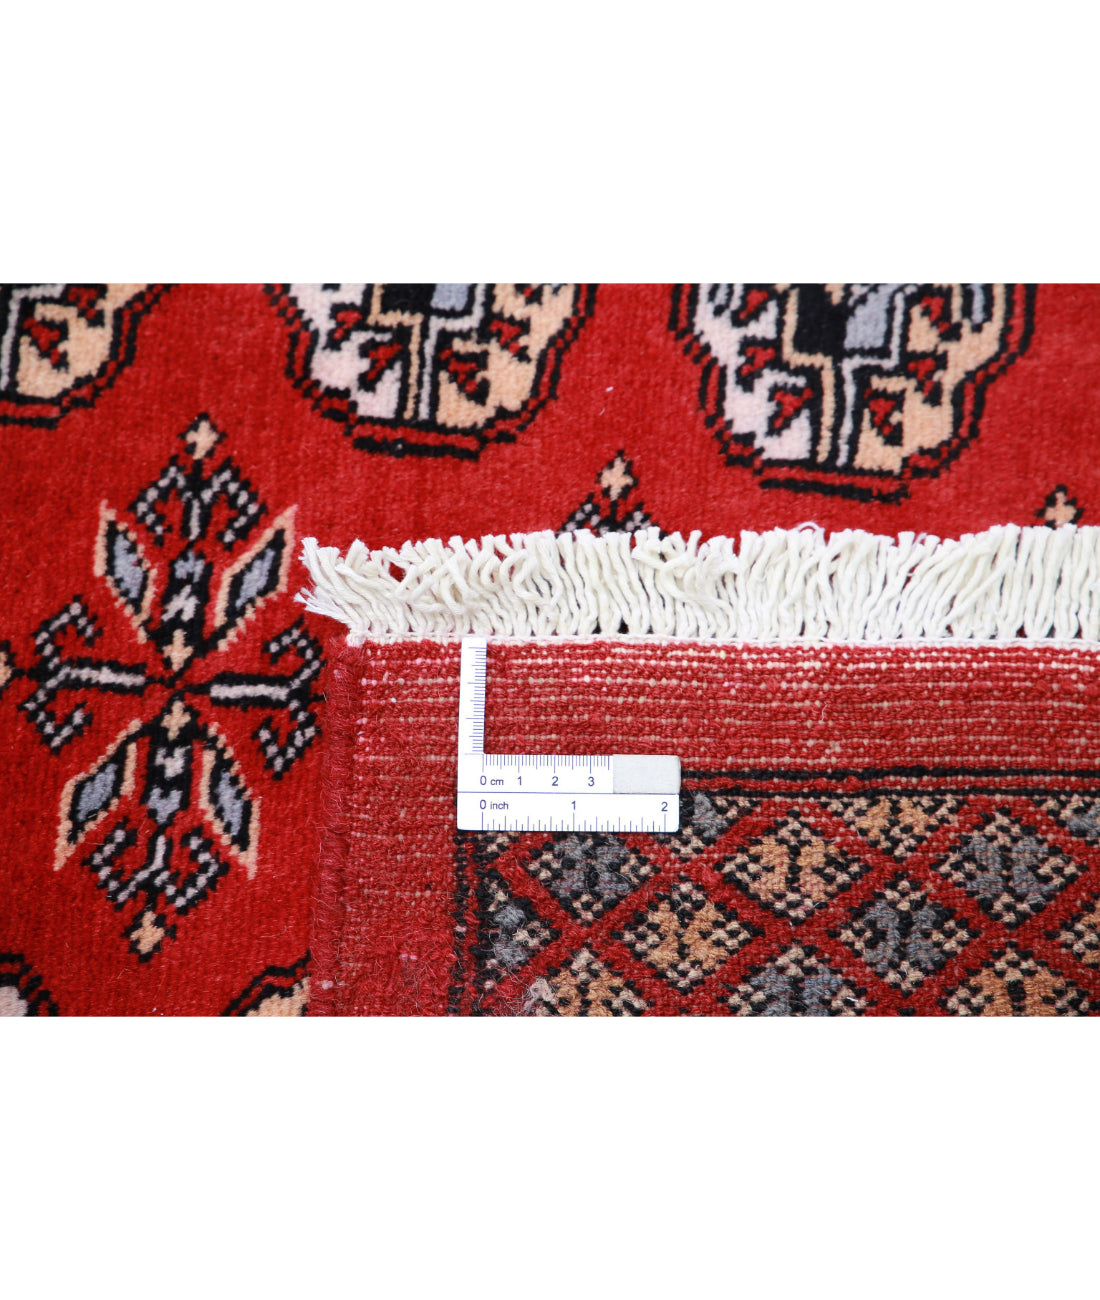 Hand Knotted Tribal Bokhara Wool Rug - 8'1'' x 9'9'' 8'1'' x 9'9'' (243 X 293) / Red / Beige